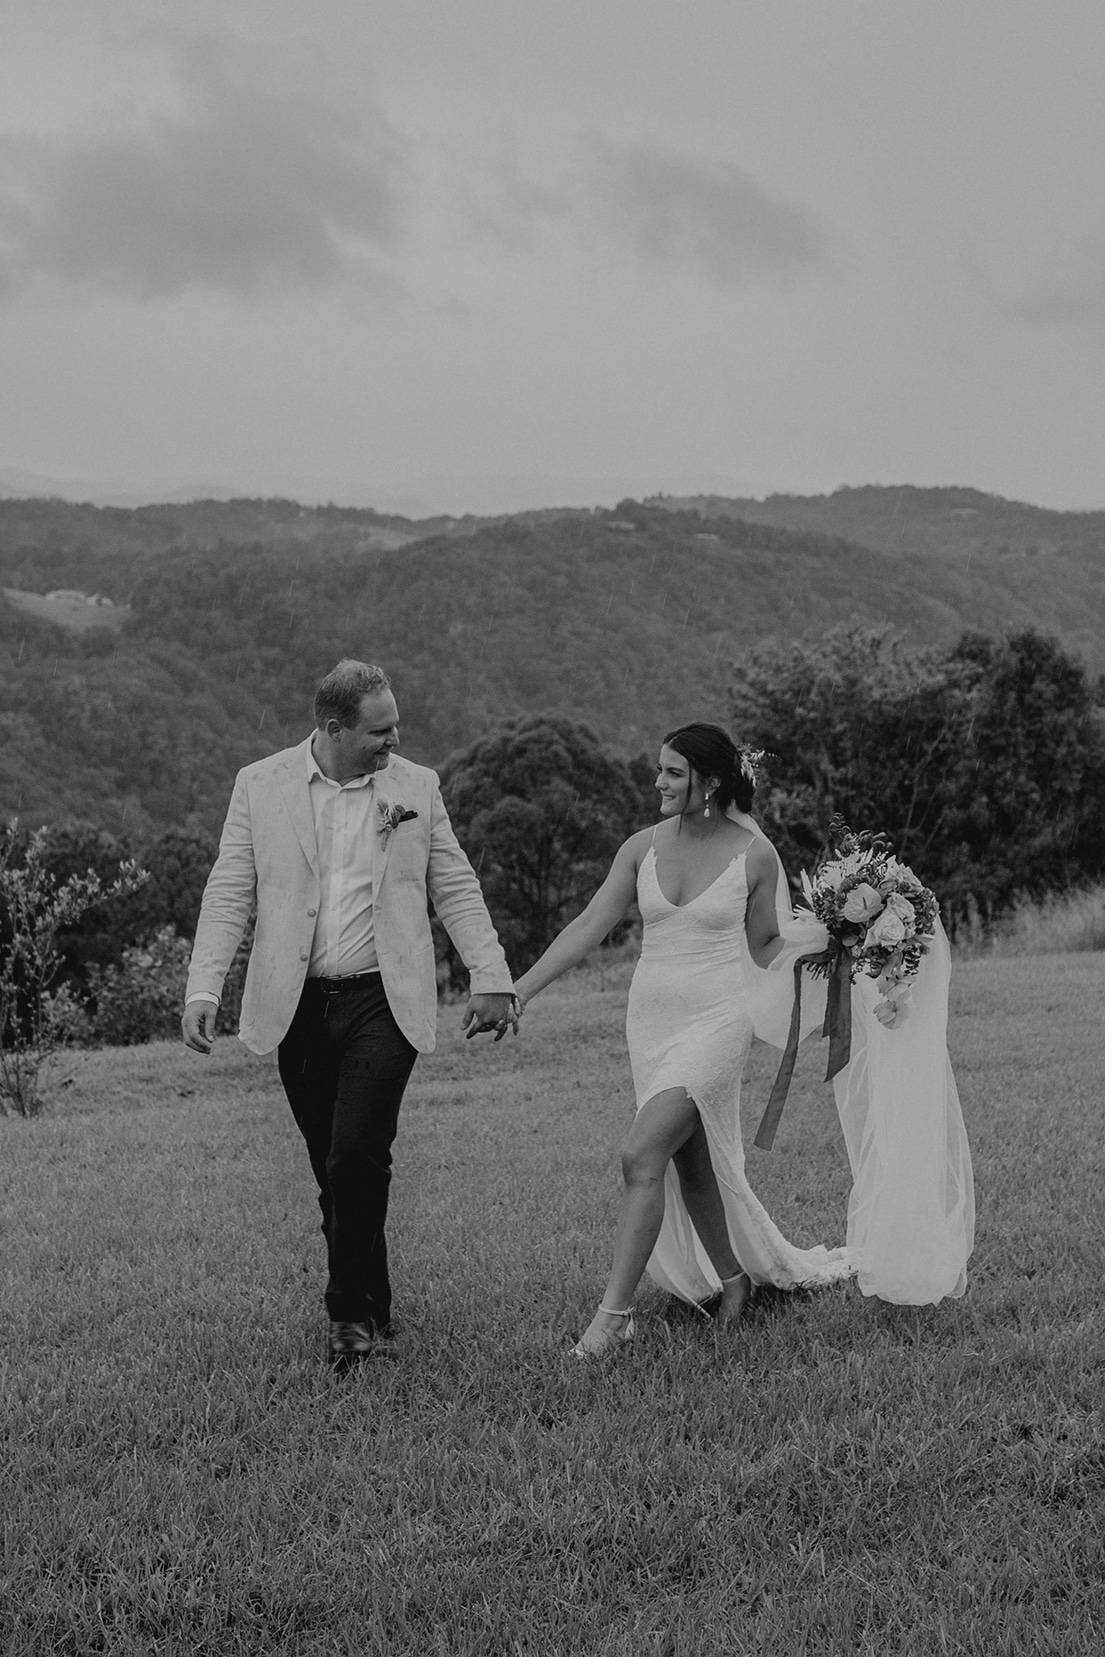 Bride wearing a white dress with front split walking with her groom outdoors